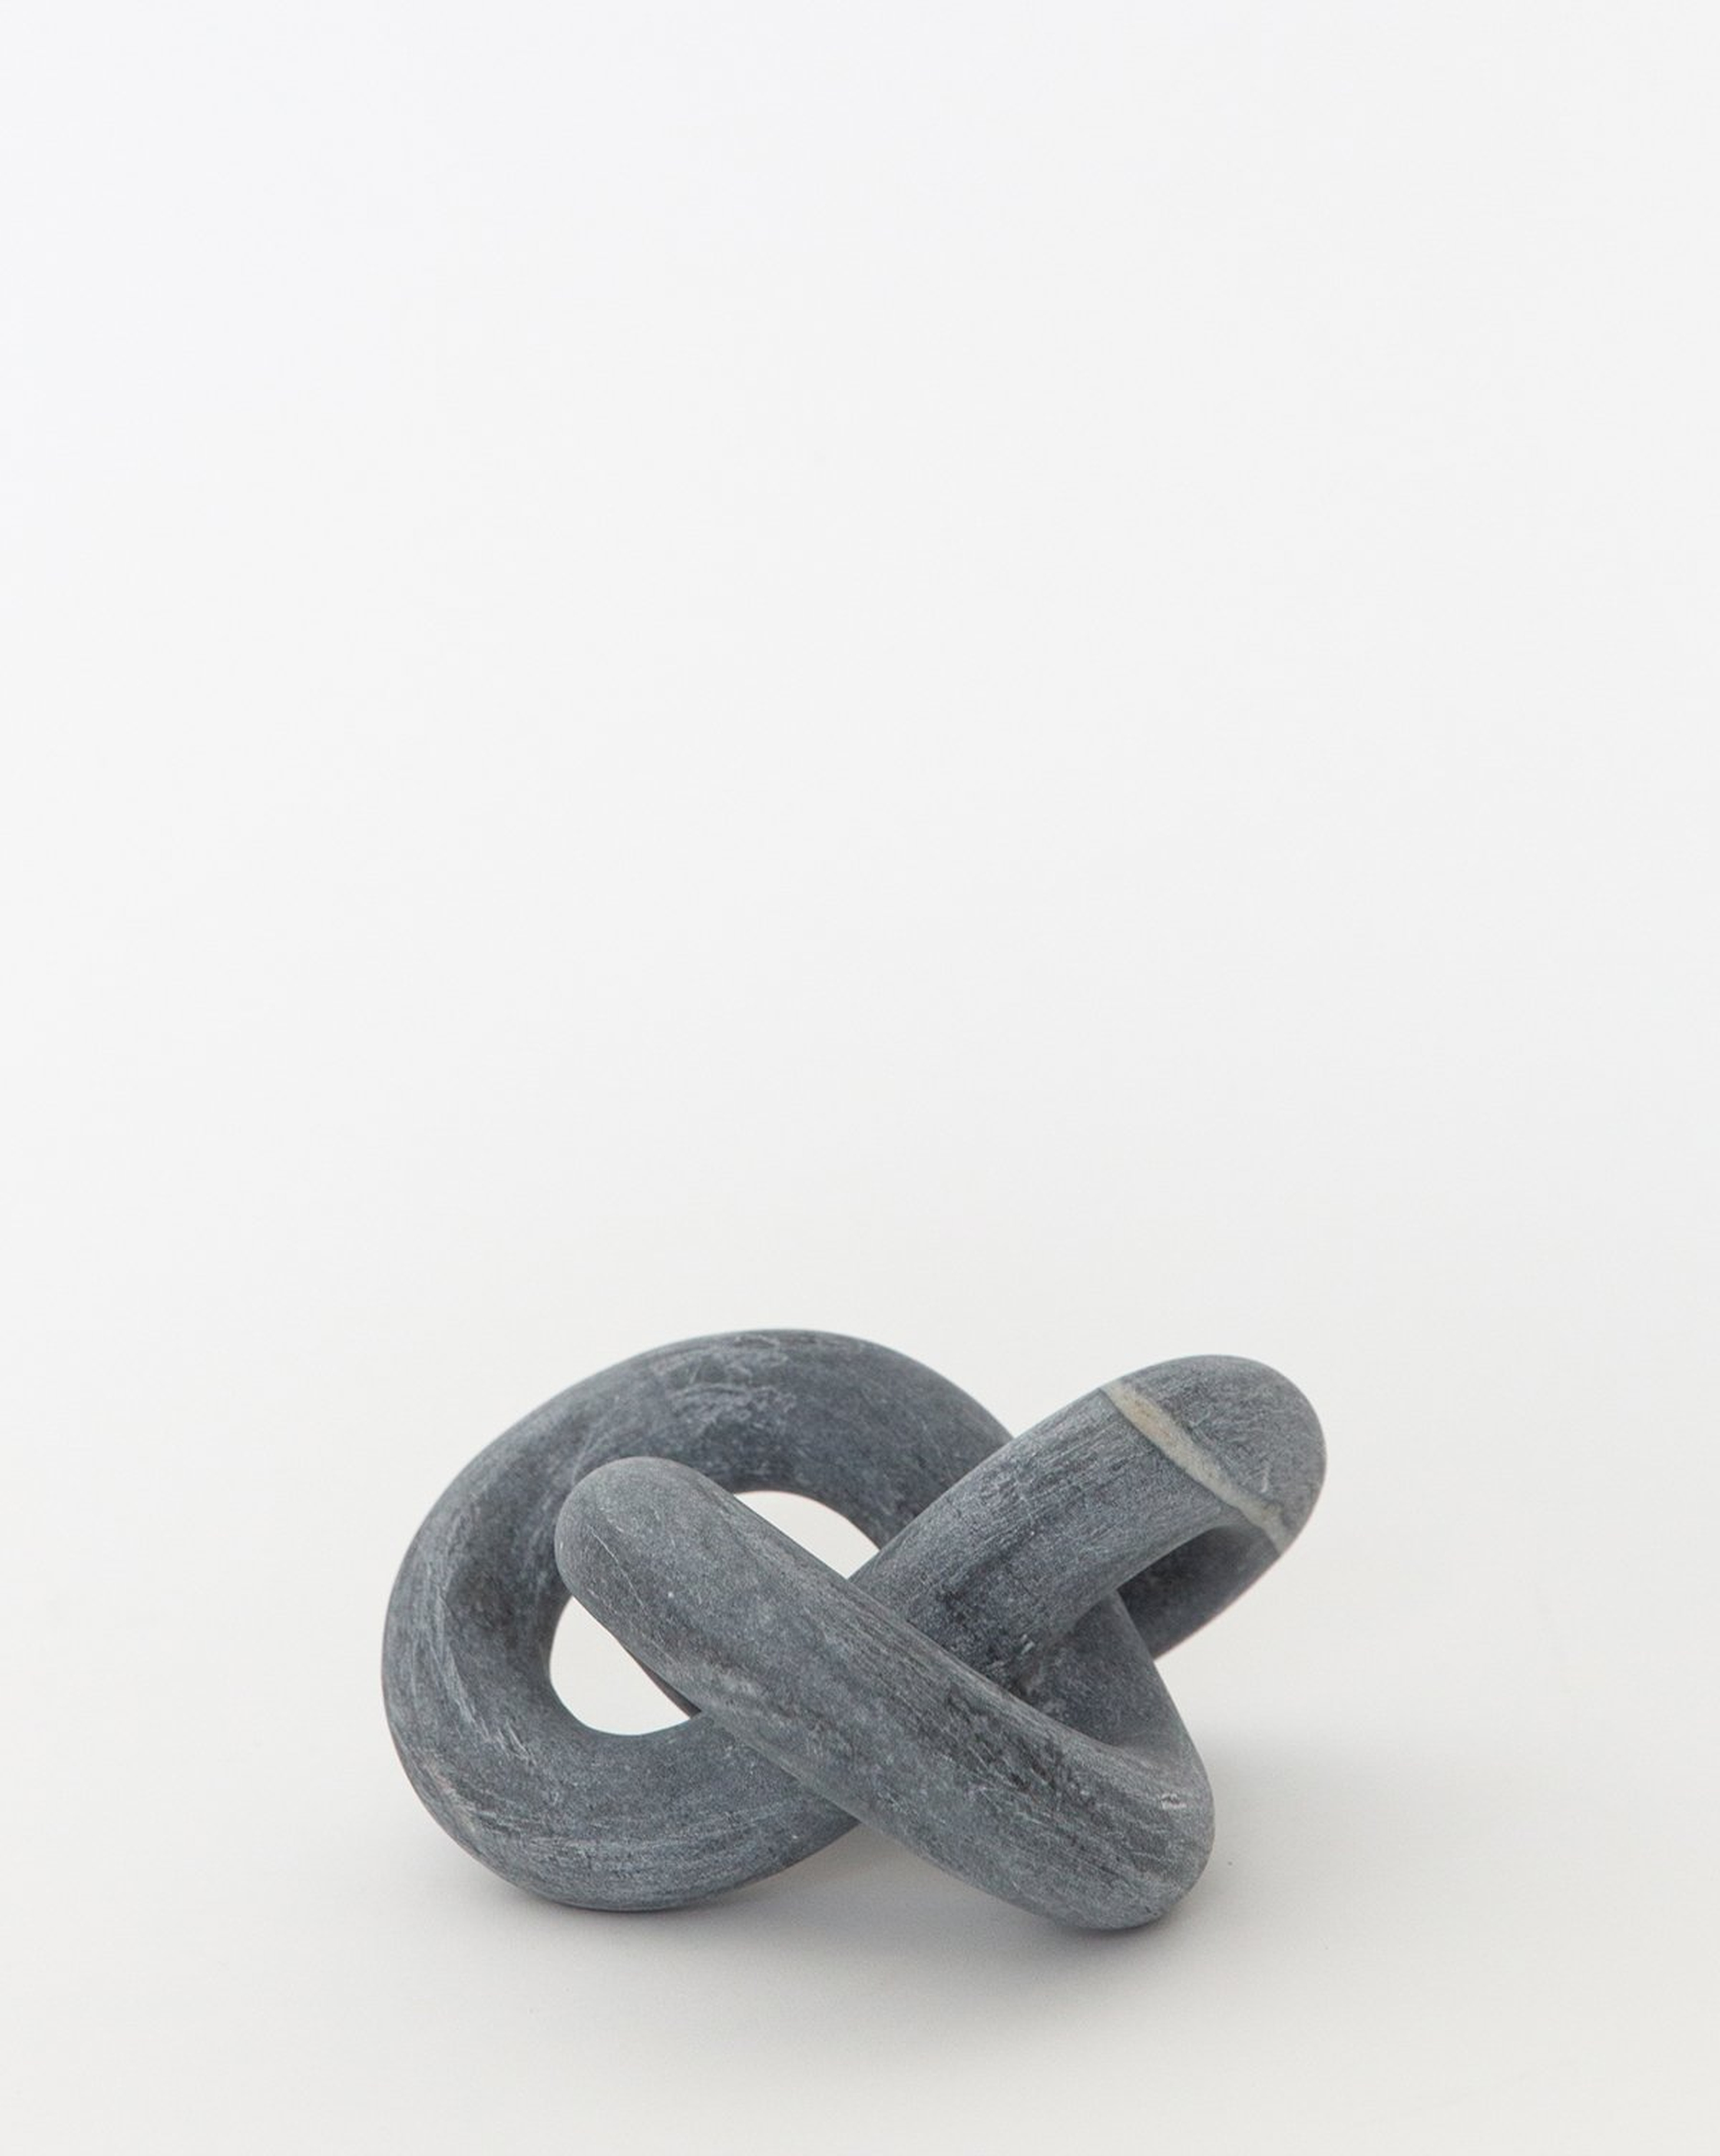 MARBLE KNOT OBJECT - charcoal - McGee & Co.